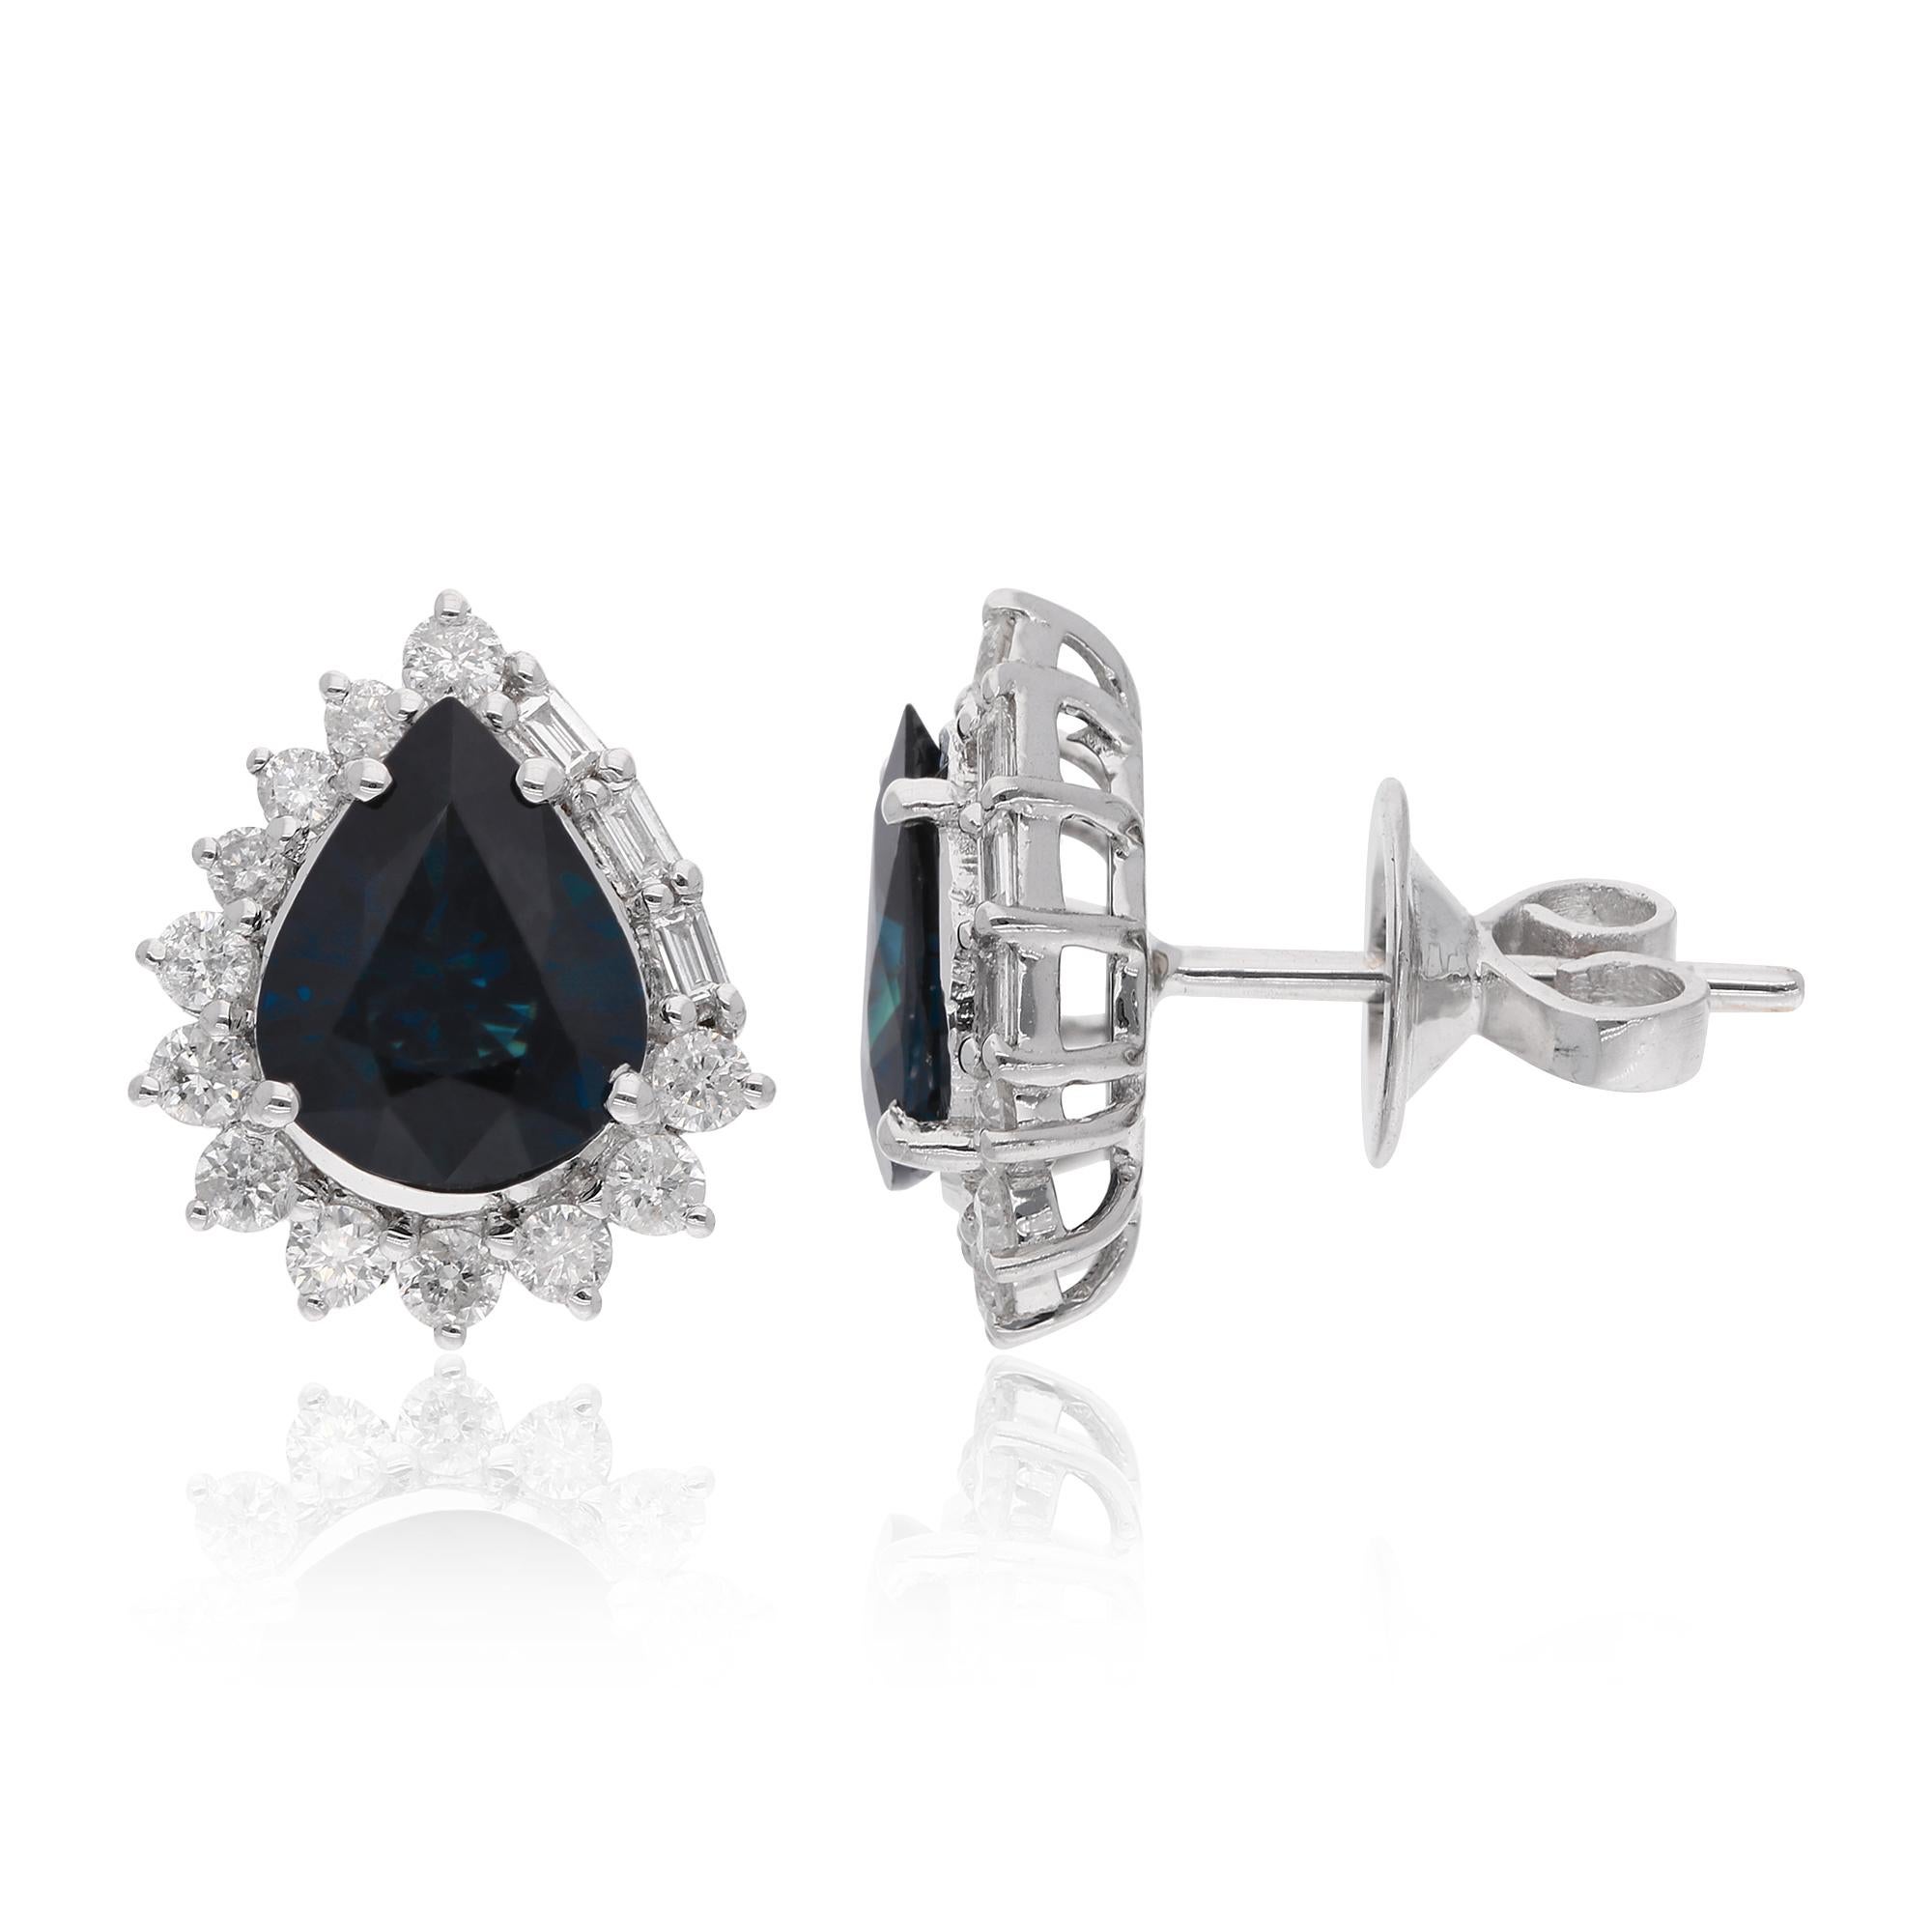 Item Code :- SEE-12830
Gross Wt. :- 4.39 gm
18k Solid White Gold Wt. :- 3.57 gm
Natural Diamond Wt. :- 0.65 Ct. ( AVERAGE DIAMOND CLARITY SI1-SI2 & COLOR H-I )
Blue Sapphire Wt. :- 3.44 Ct.
Earrings Size :- 13 x 11 mm approx.


✦